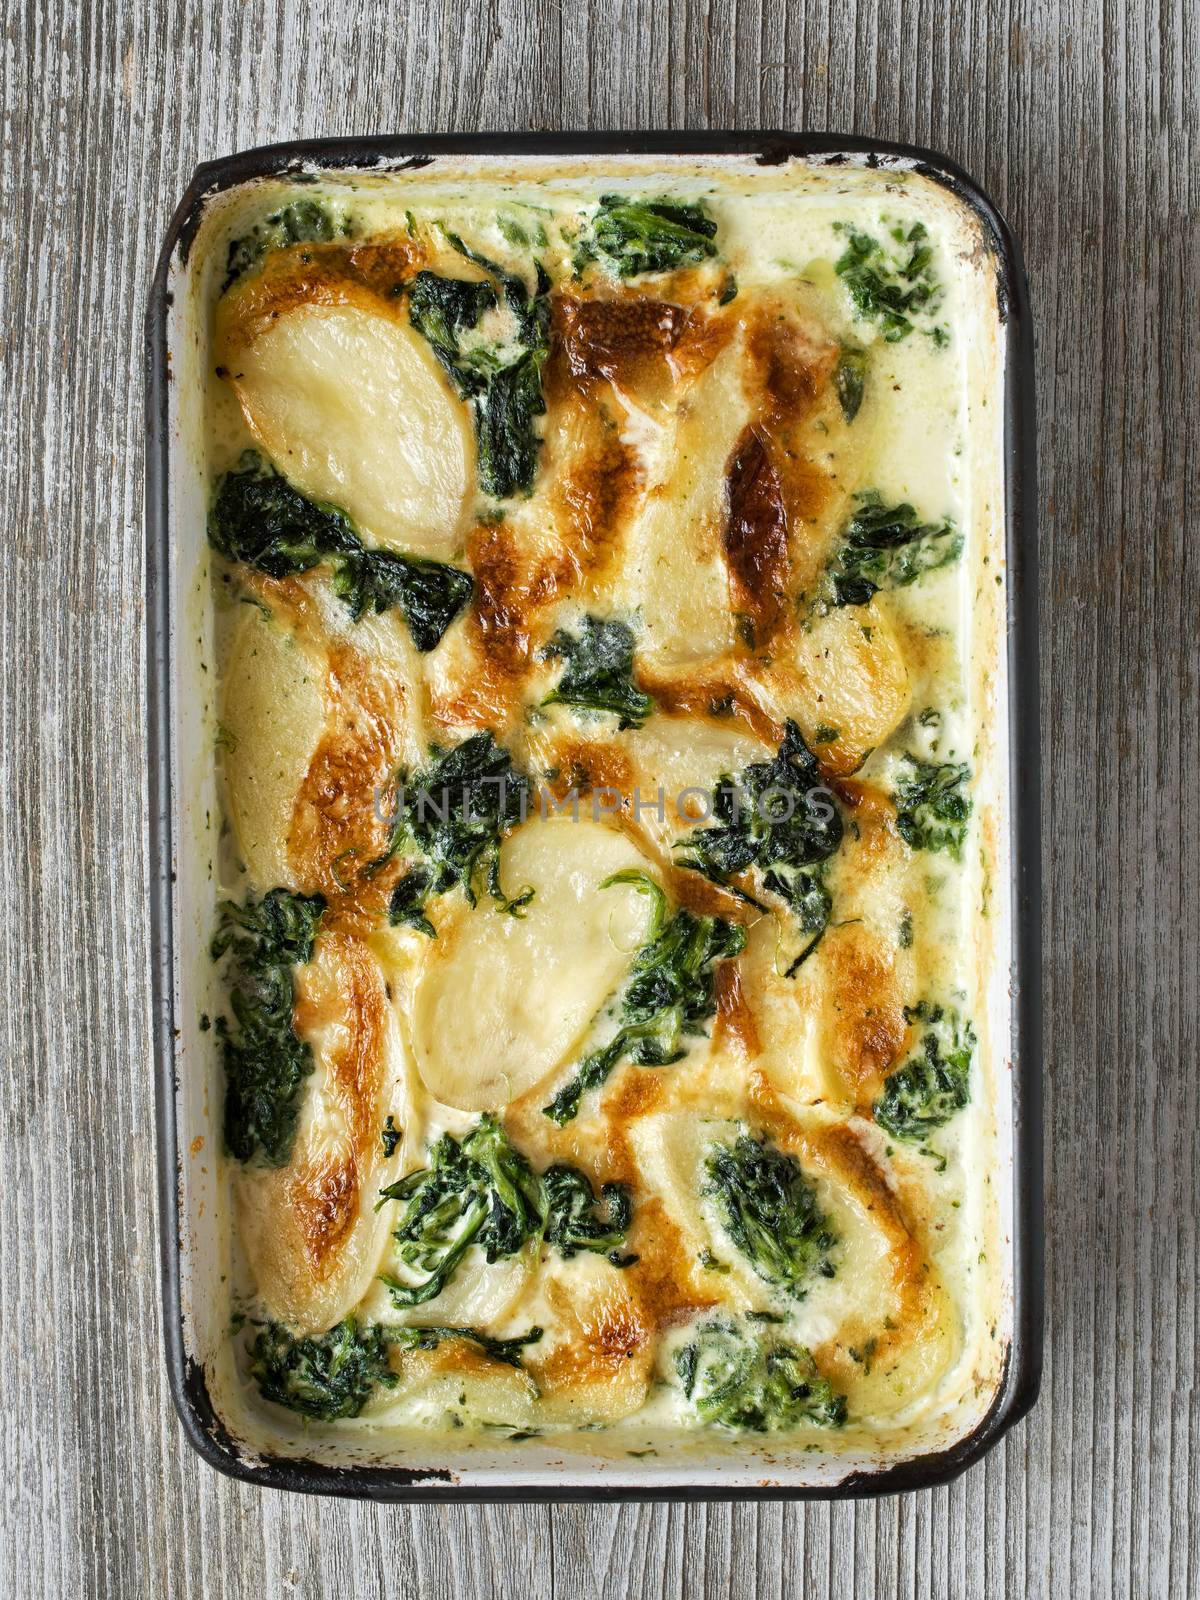 rustic golden spinach potato gratin dauphinois by zkruger